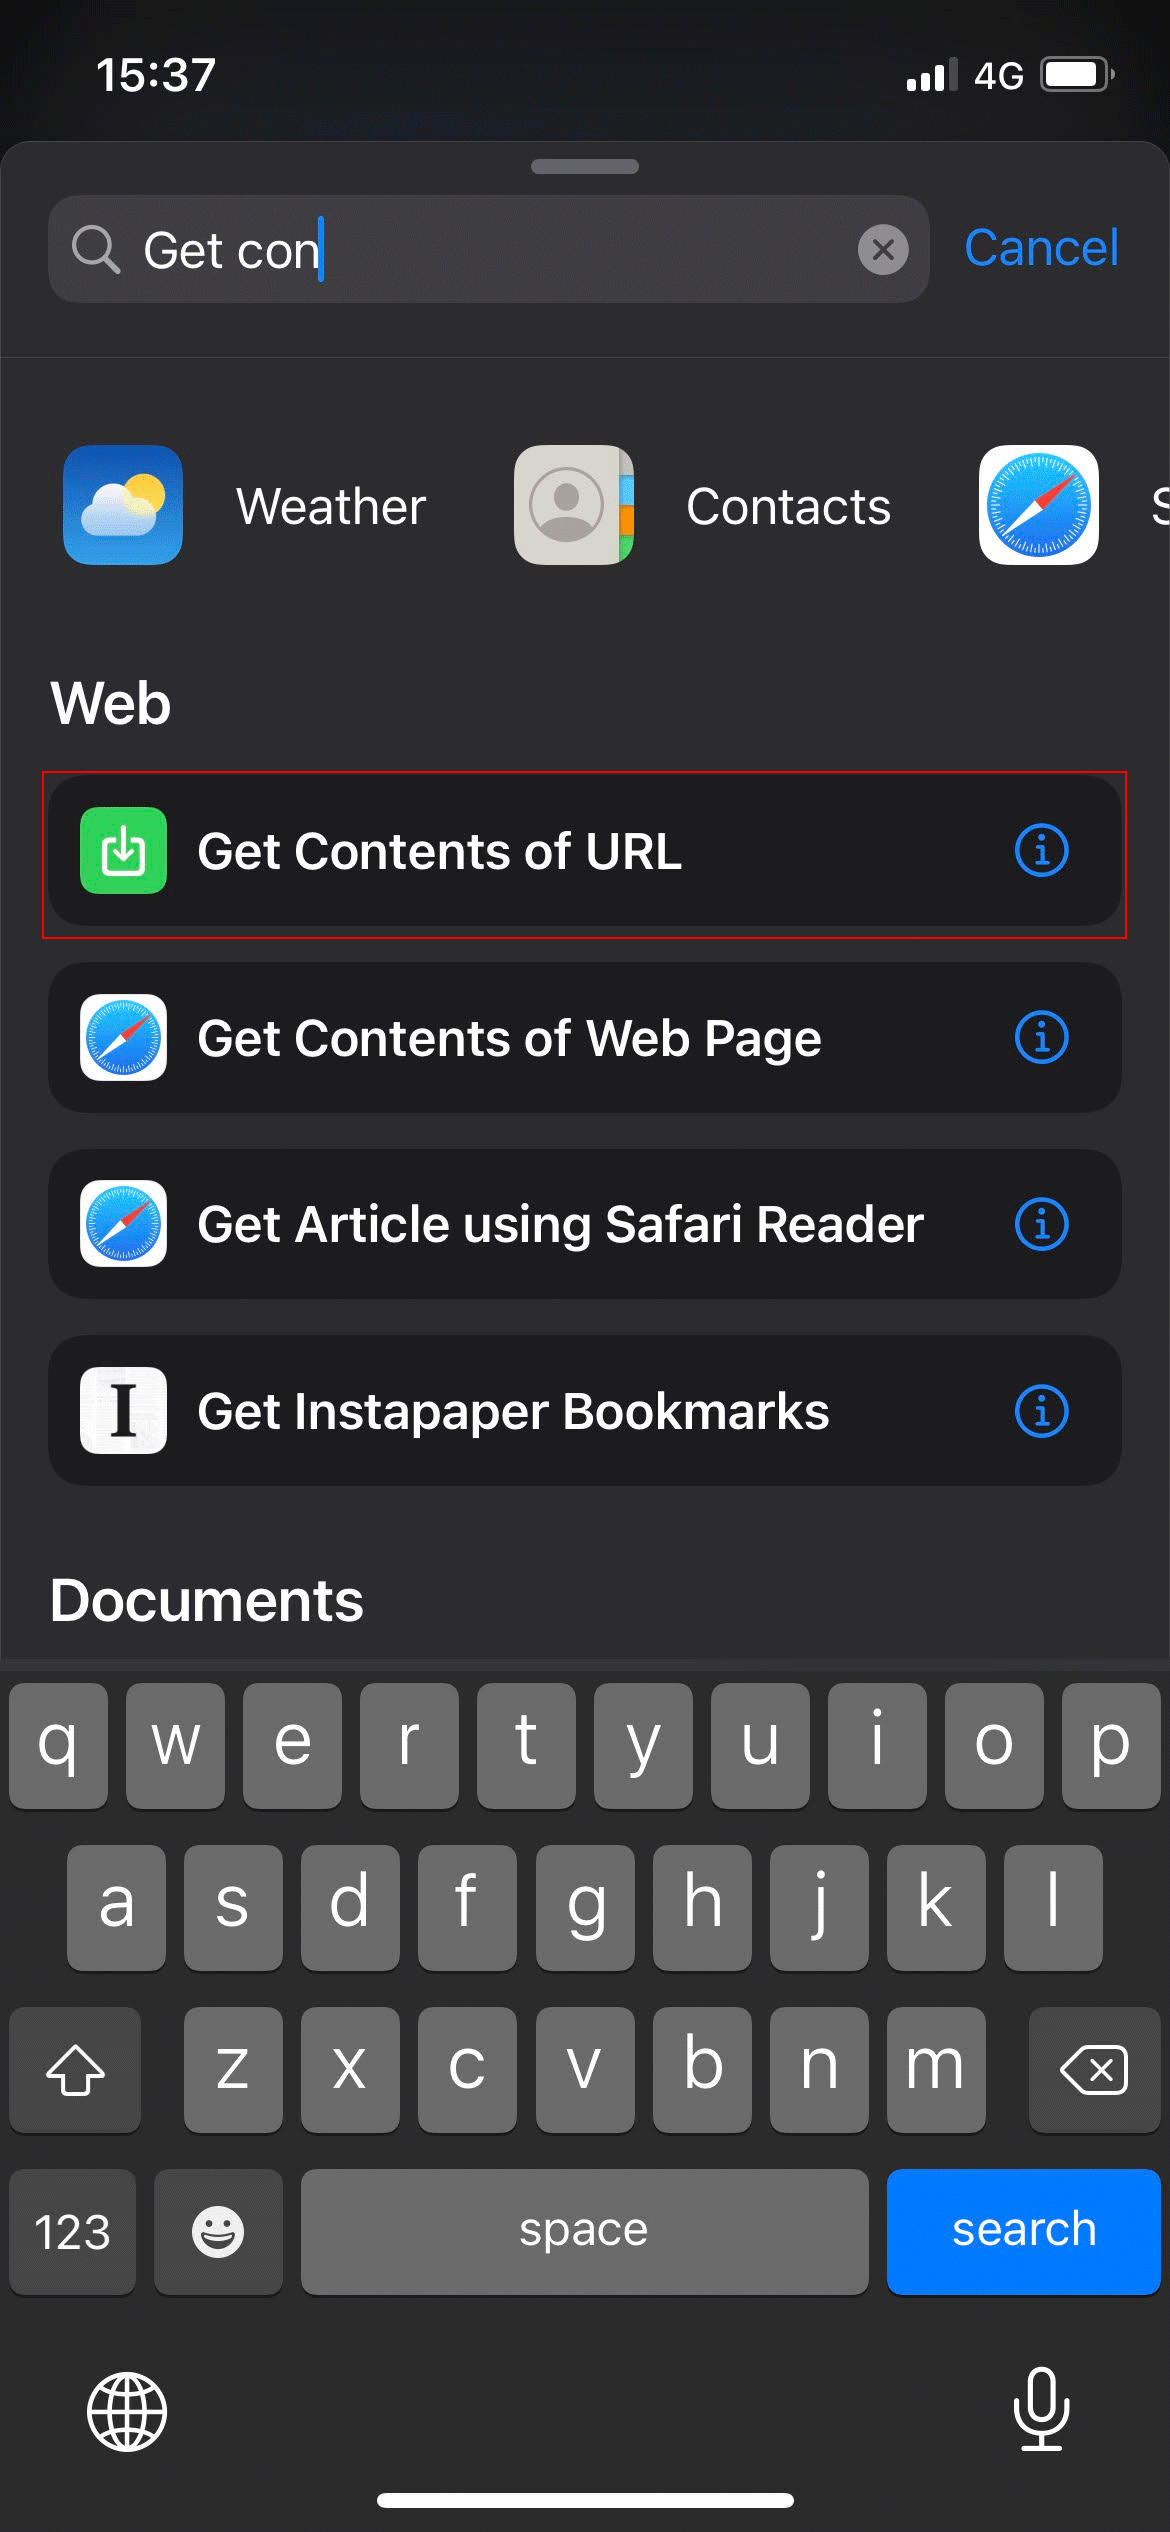 adding the Get Contents of URL module in the shortcut in order to integrate the IFTTT link with the ilevia Home automation system